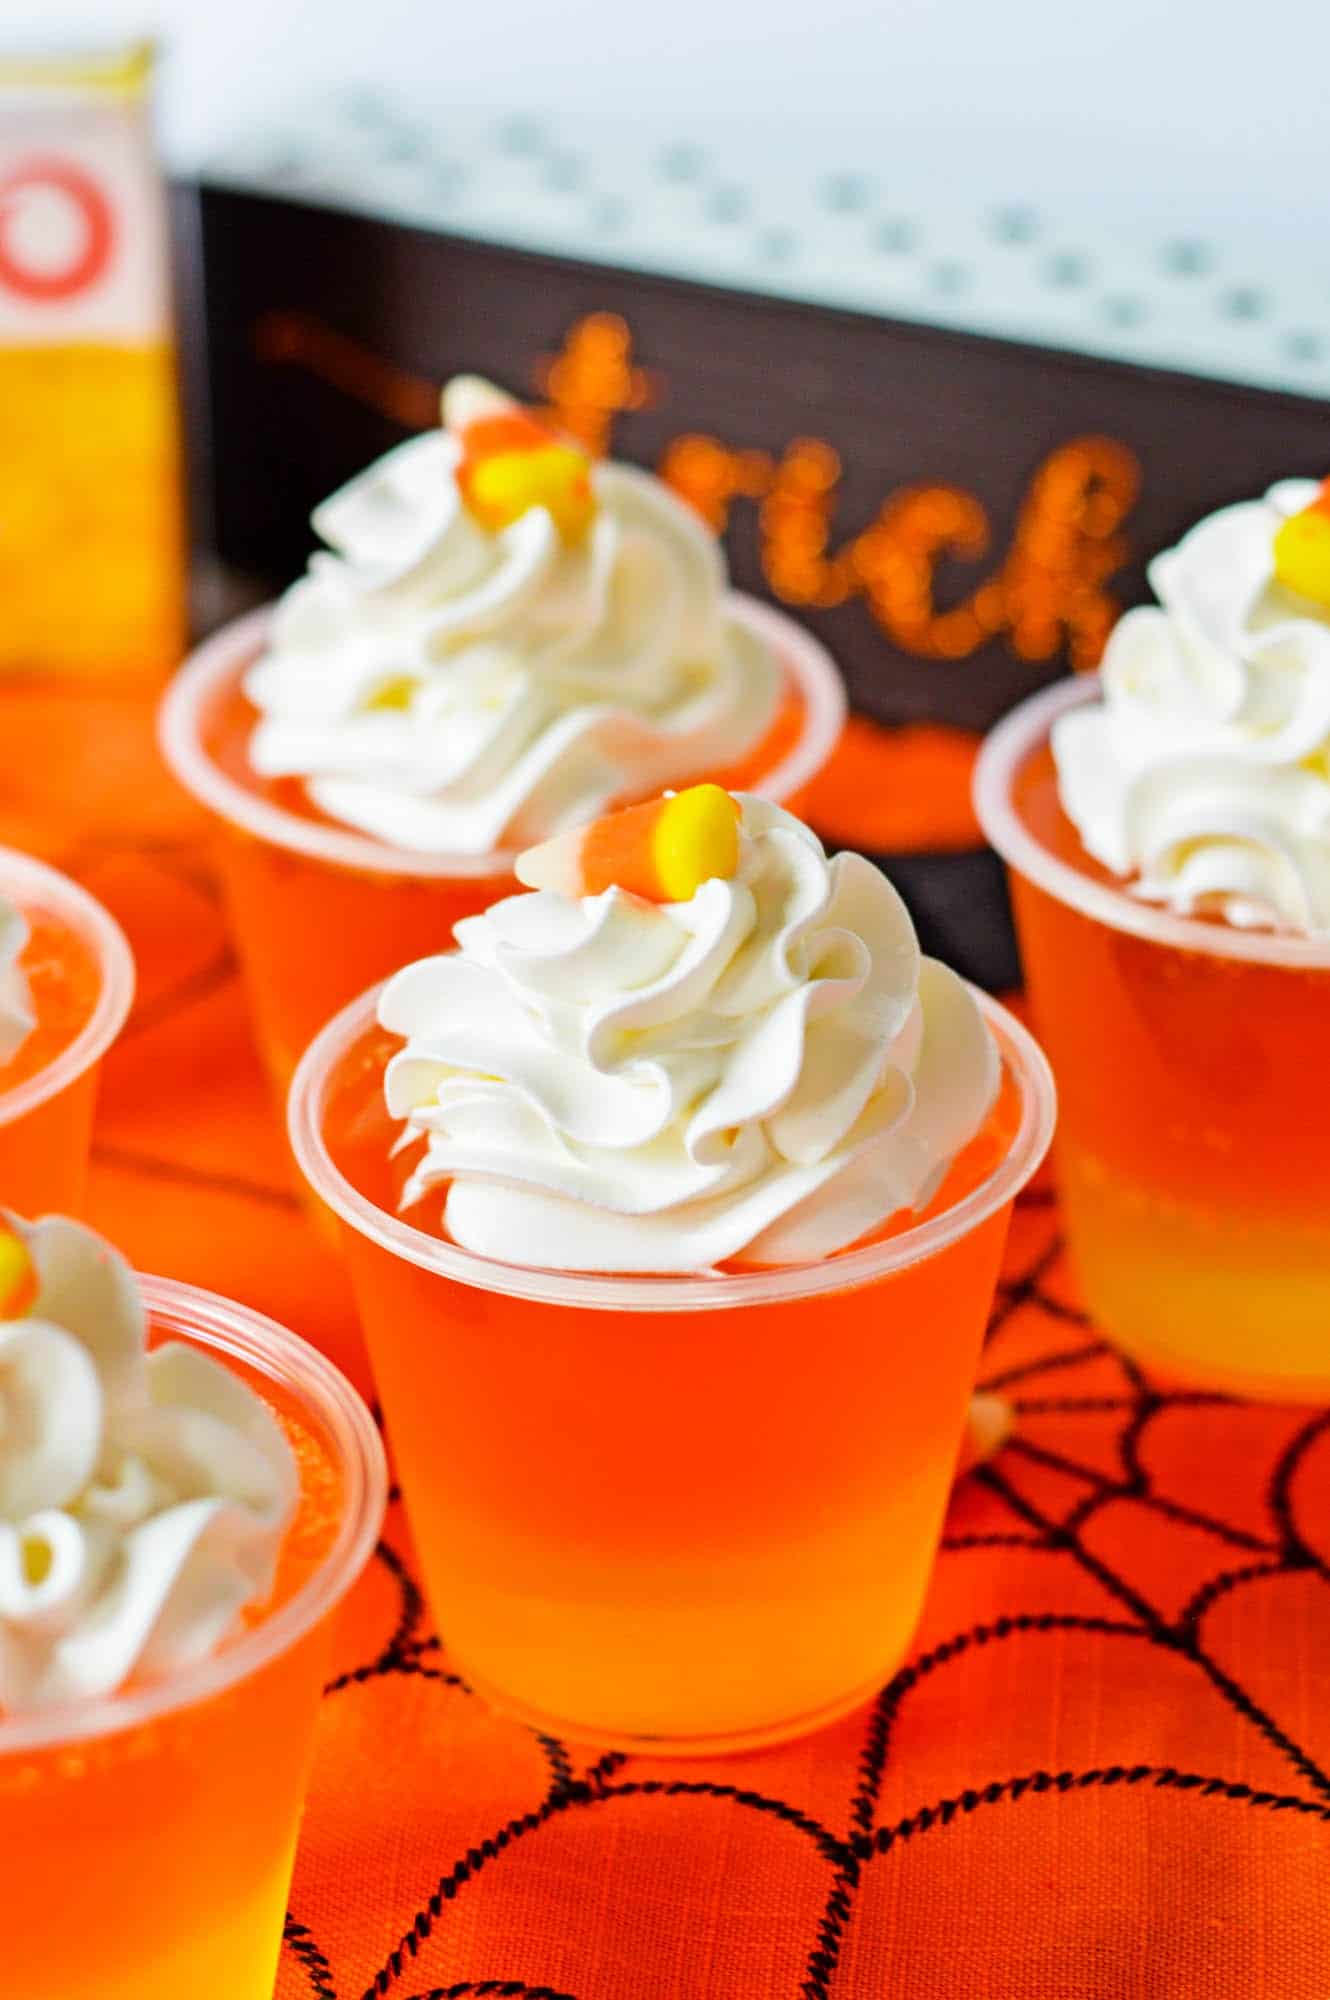 cups of candy corn jello next to halloween decorations